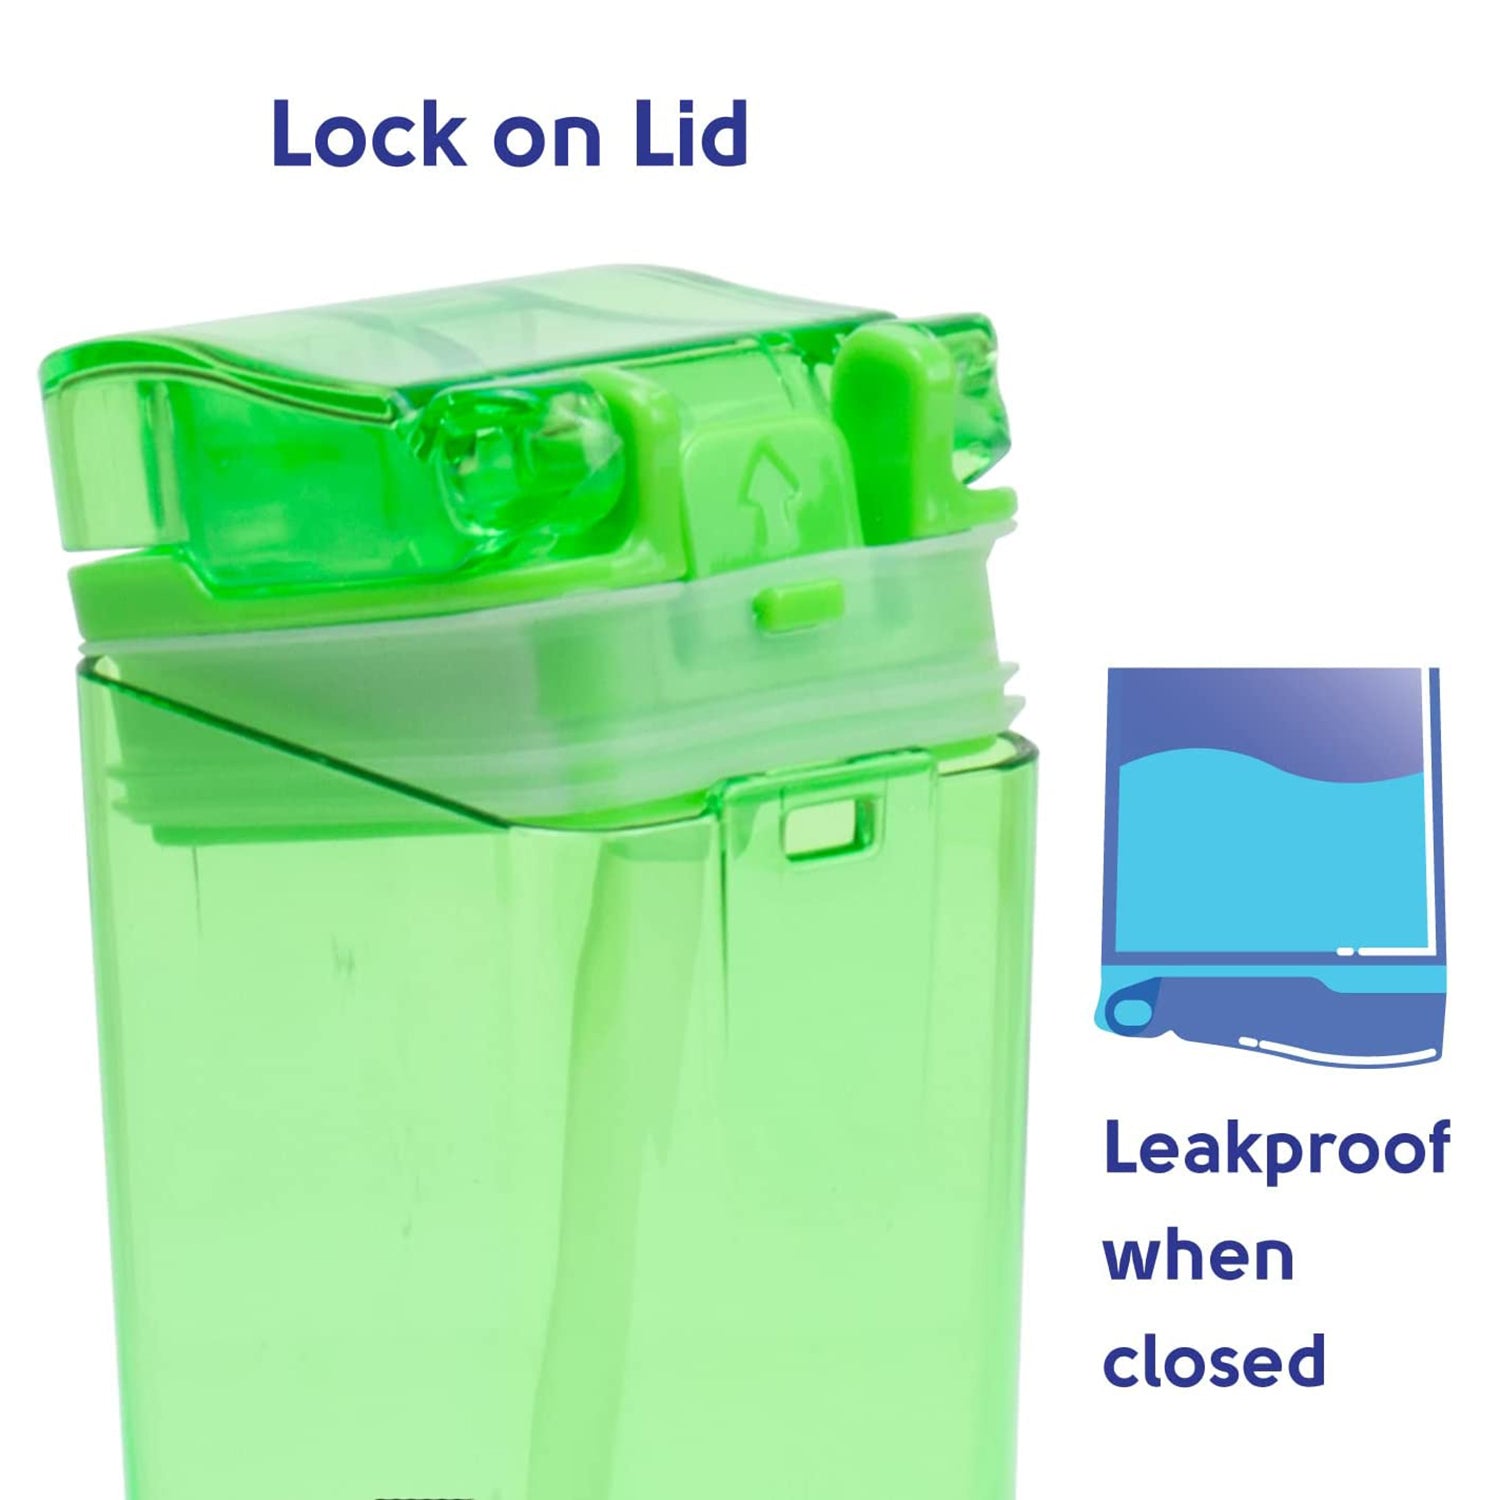 Kitchen Innovations Refillable Drink In The Box Anti-Leak BPA Free Green 8 Oz